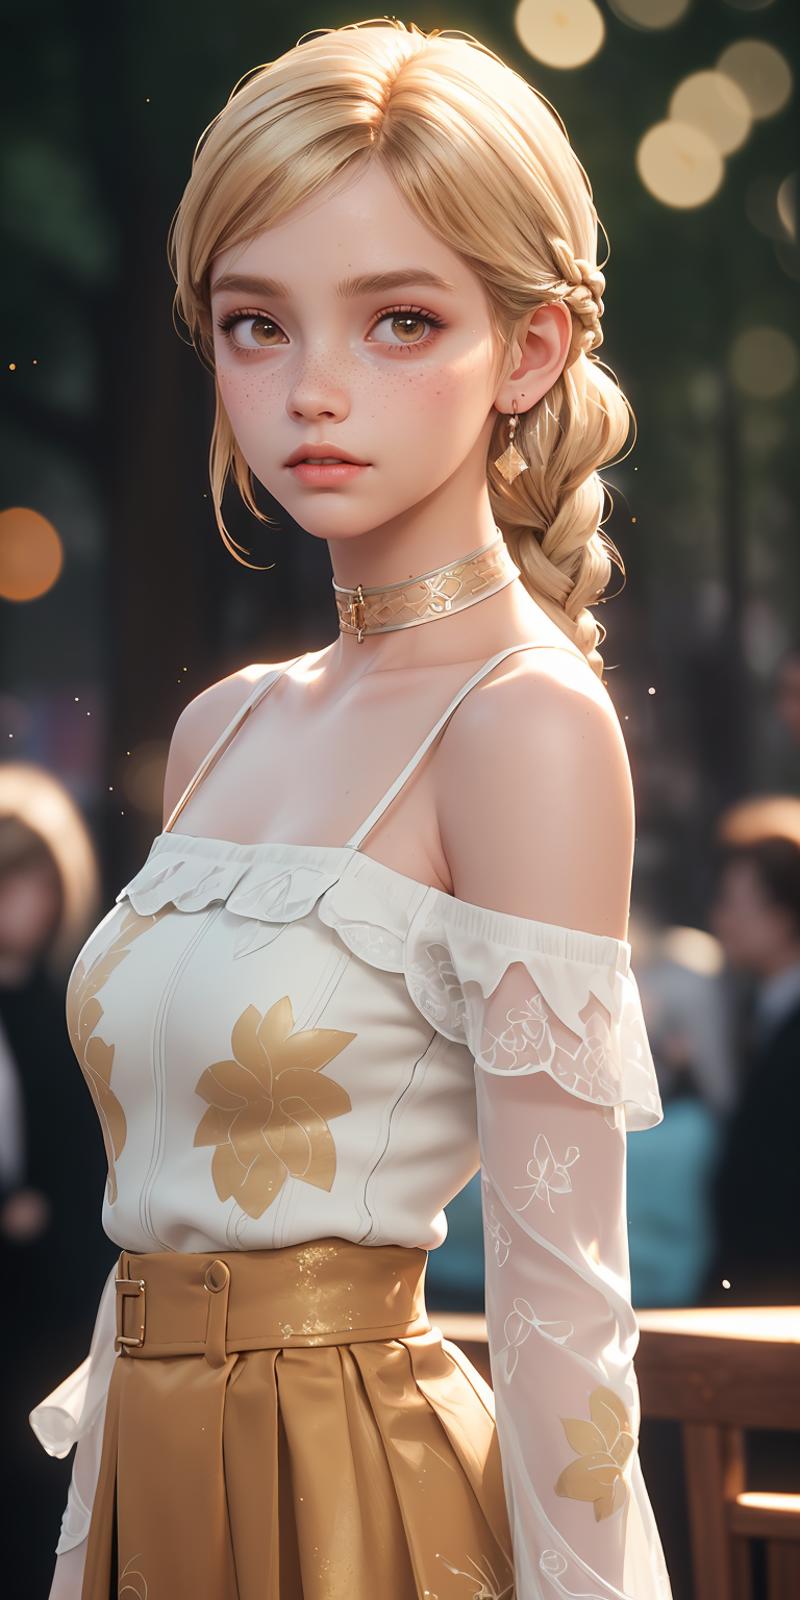 A 3D rendered image of a woman wearing a white dress with gold accents, including a gold chain around her neck and a gold flower design on her dress.